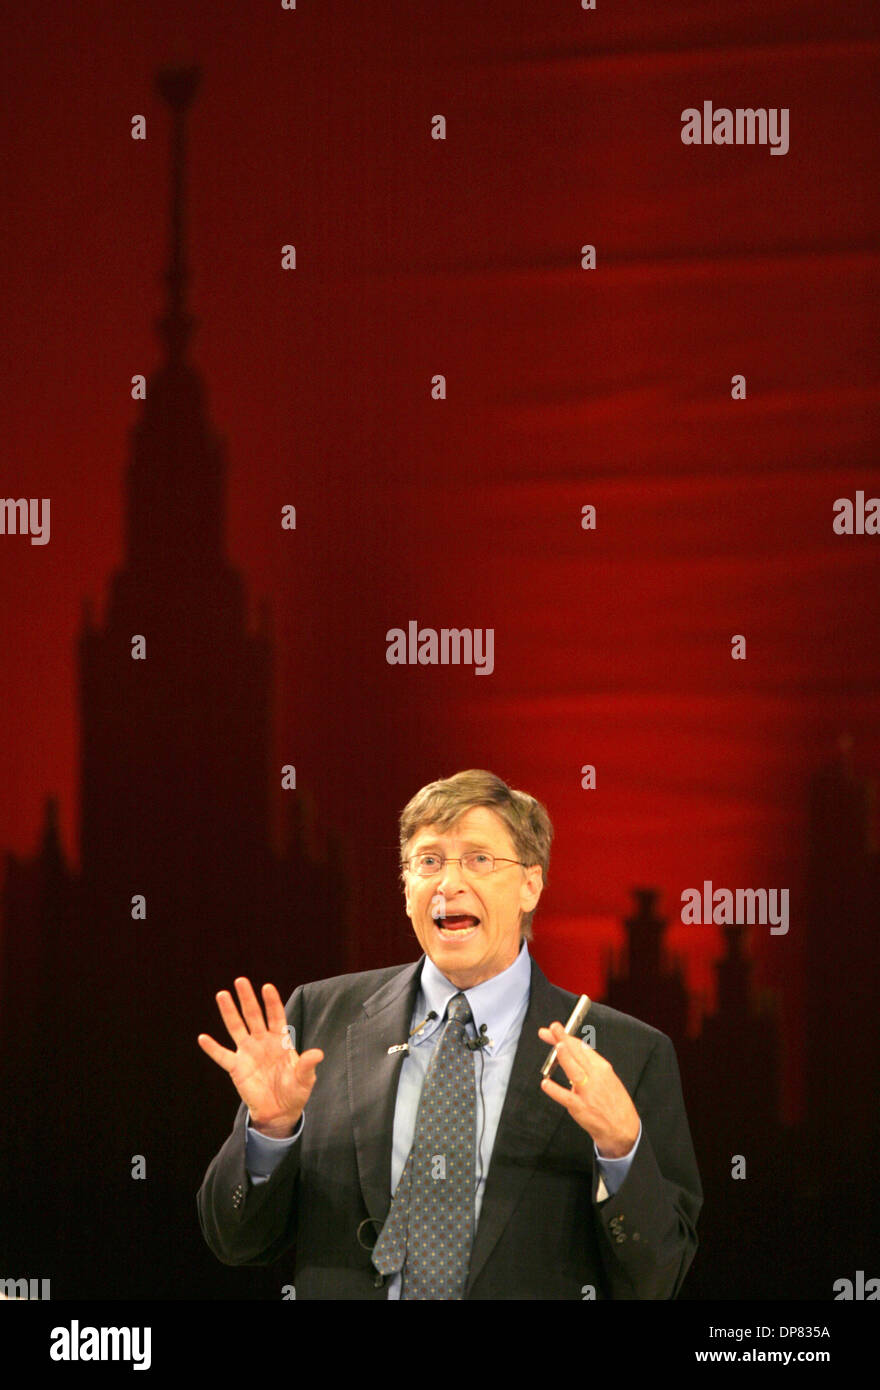 Nov 07, 2006 - Moscow, Russia - Microsoft chairman BILL GATES visits Moscow. Gates promises that his company will do 'everything it can' to connect Russian schools to the World Wide Web. Gates also presents the new Microsoft product 'Windows Vista.' (Credit Image: © PhotoXpress/ZUMA Press) Stock Photo